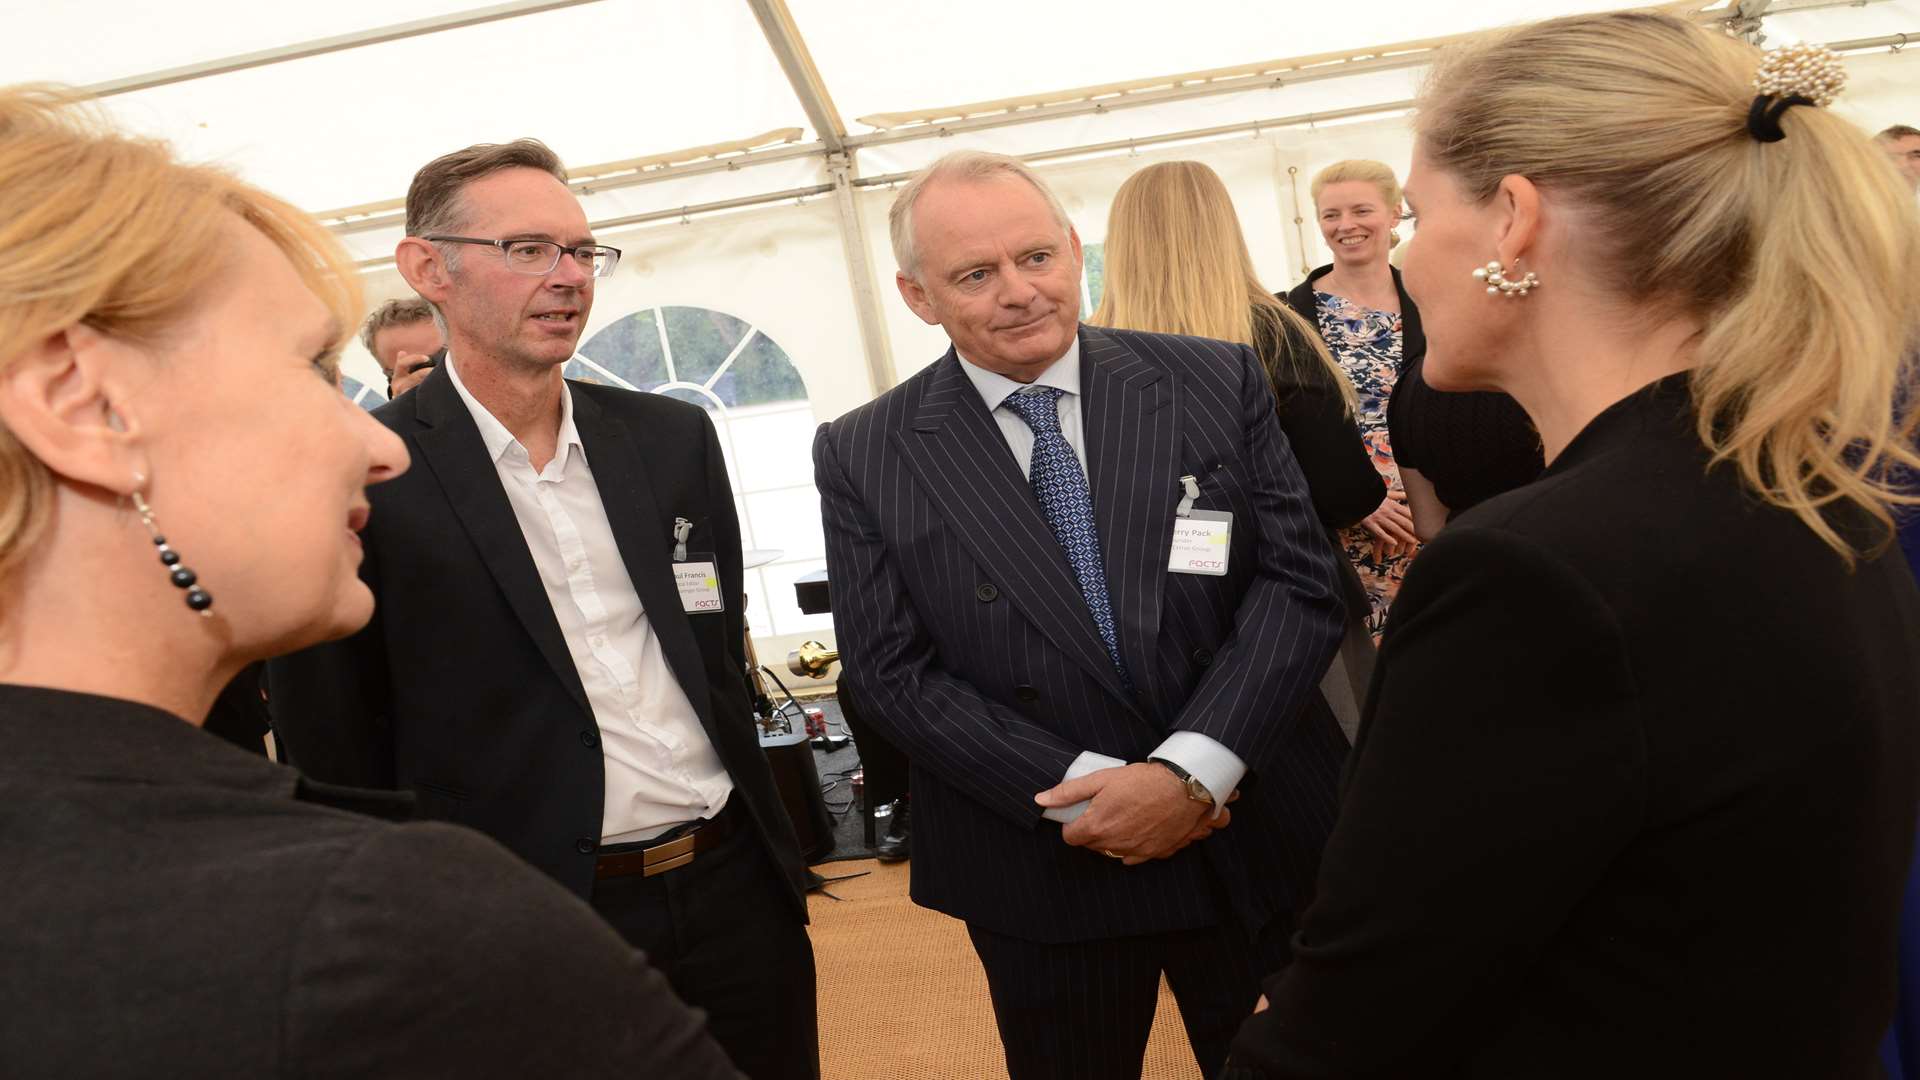 The Countess meets the KM Group's political editor Paul Francis and Holiday Extras founder Gerry Pack. Picture: Gary Browne